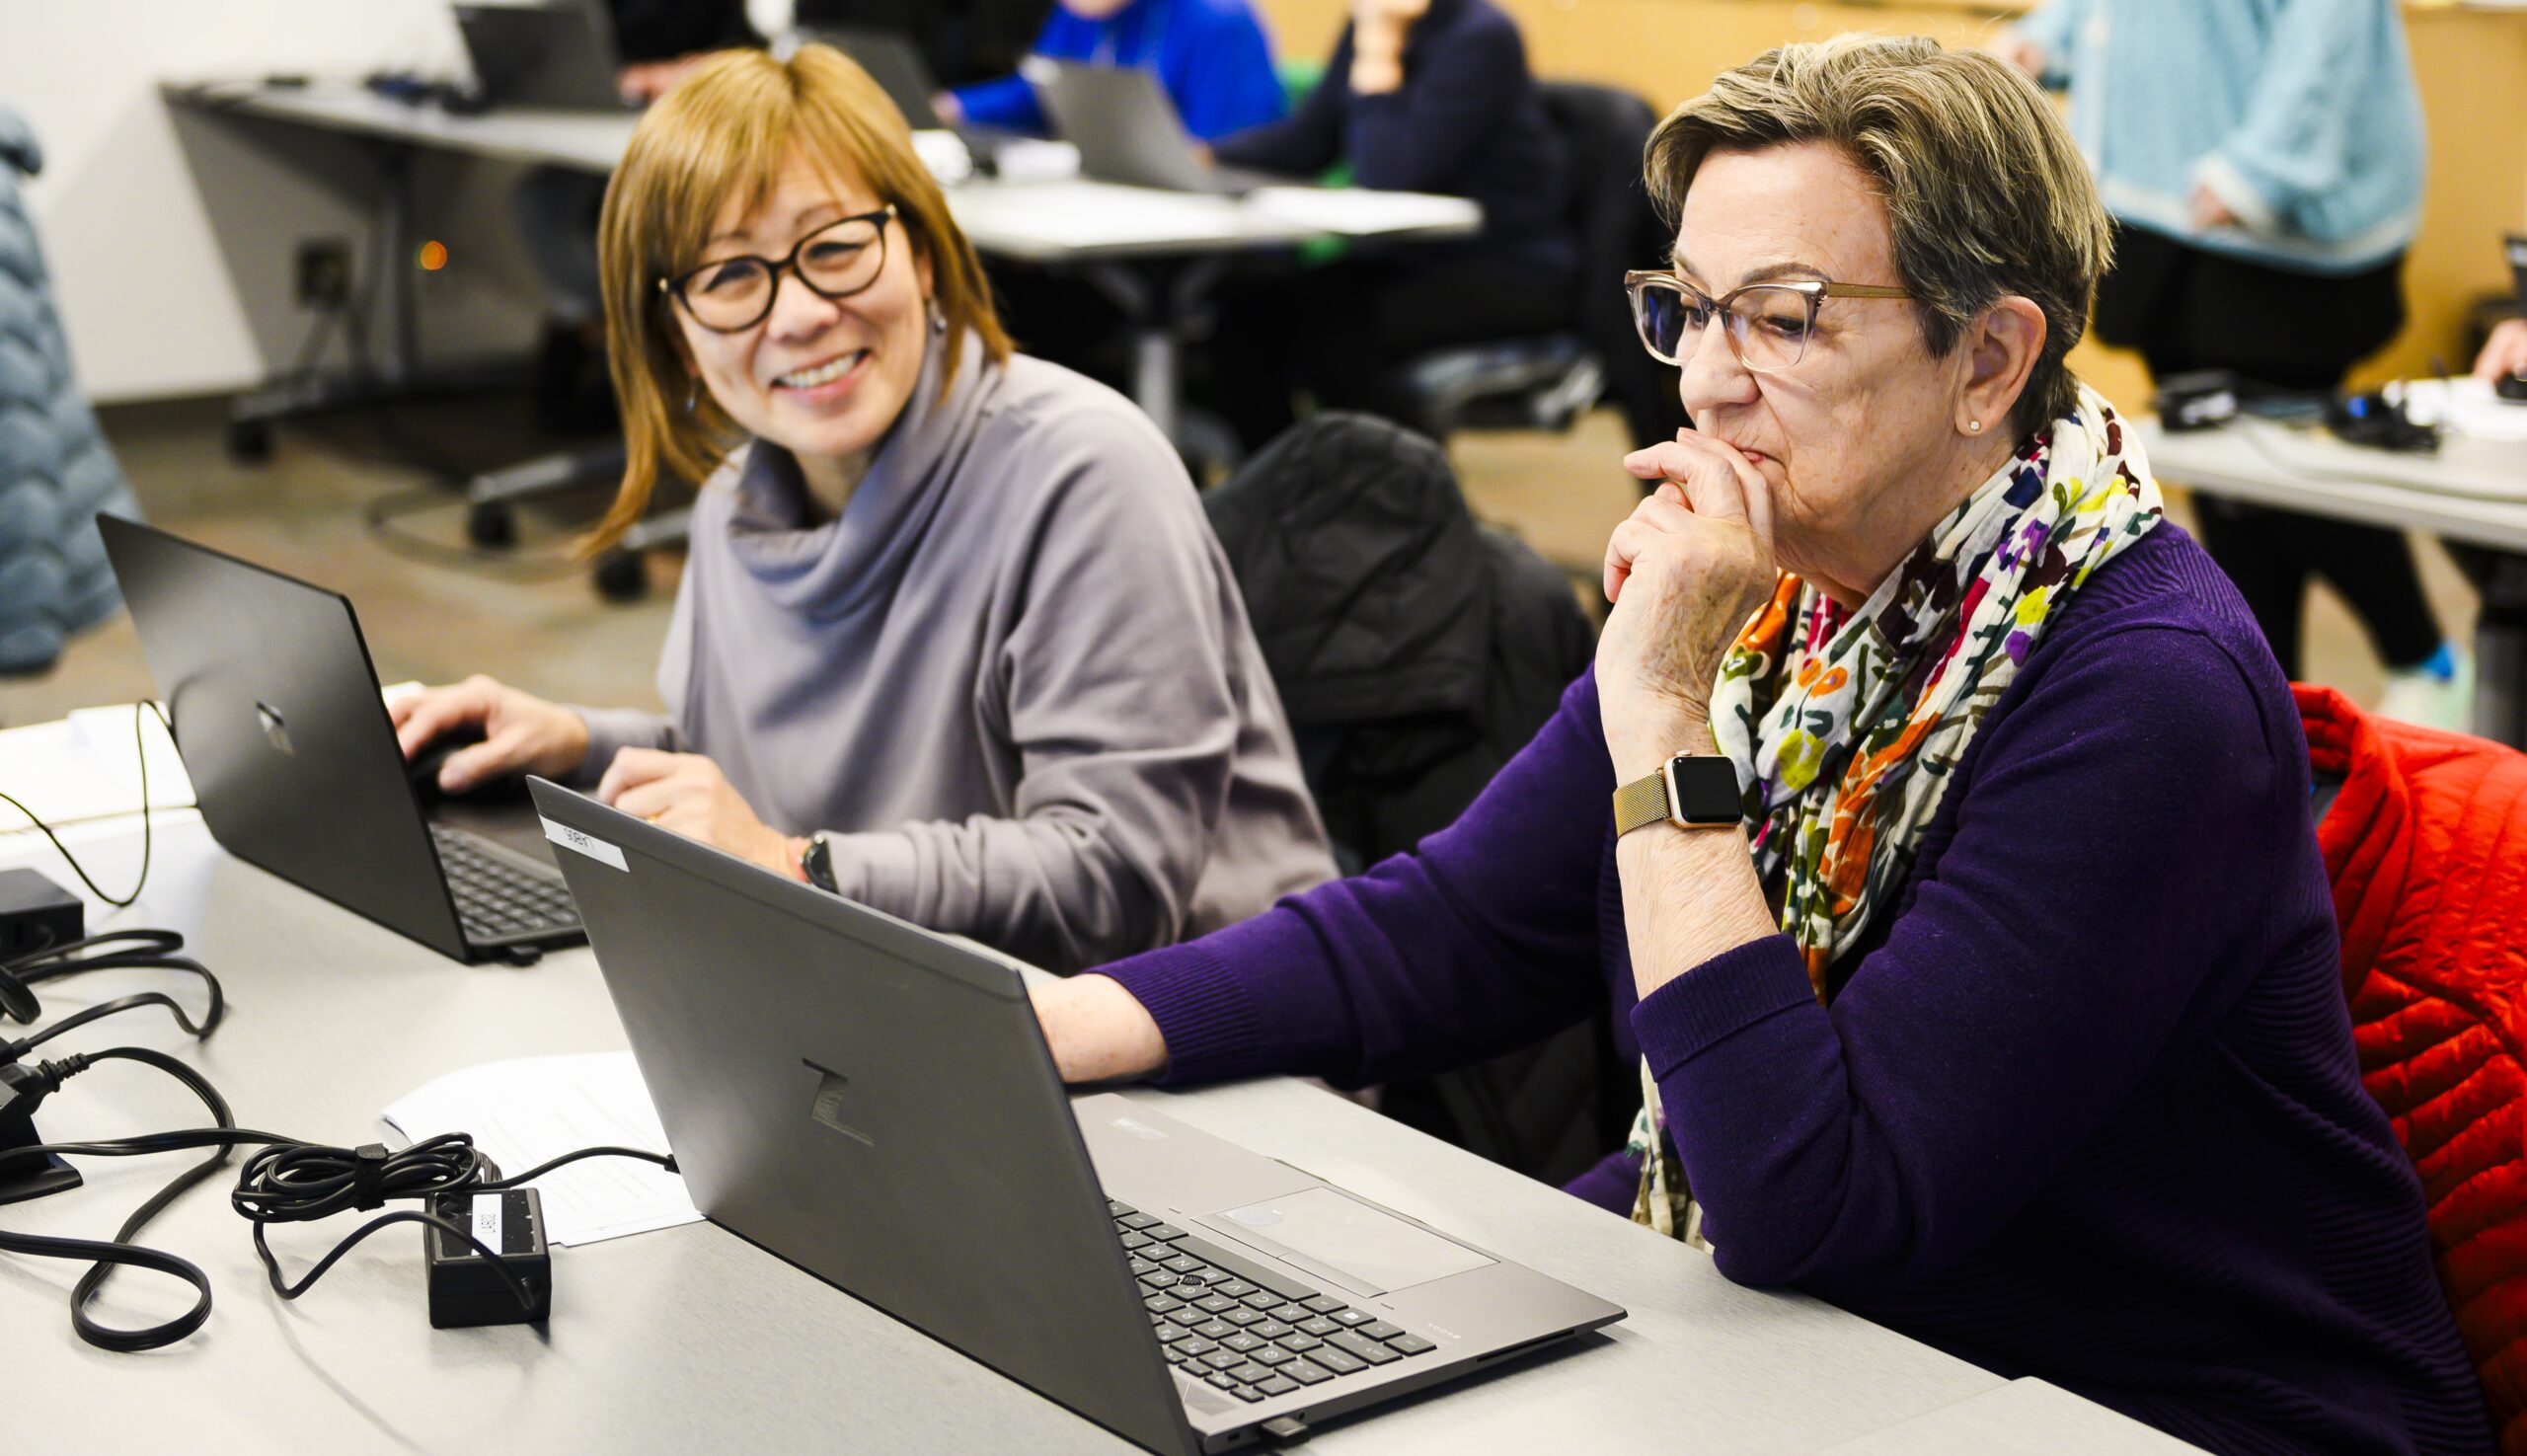 two adult learners sit in front of laptops in the lab